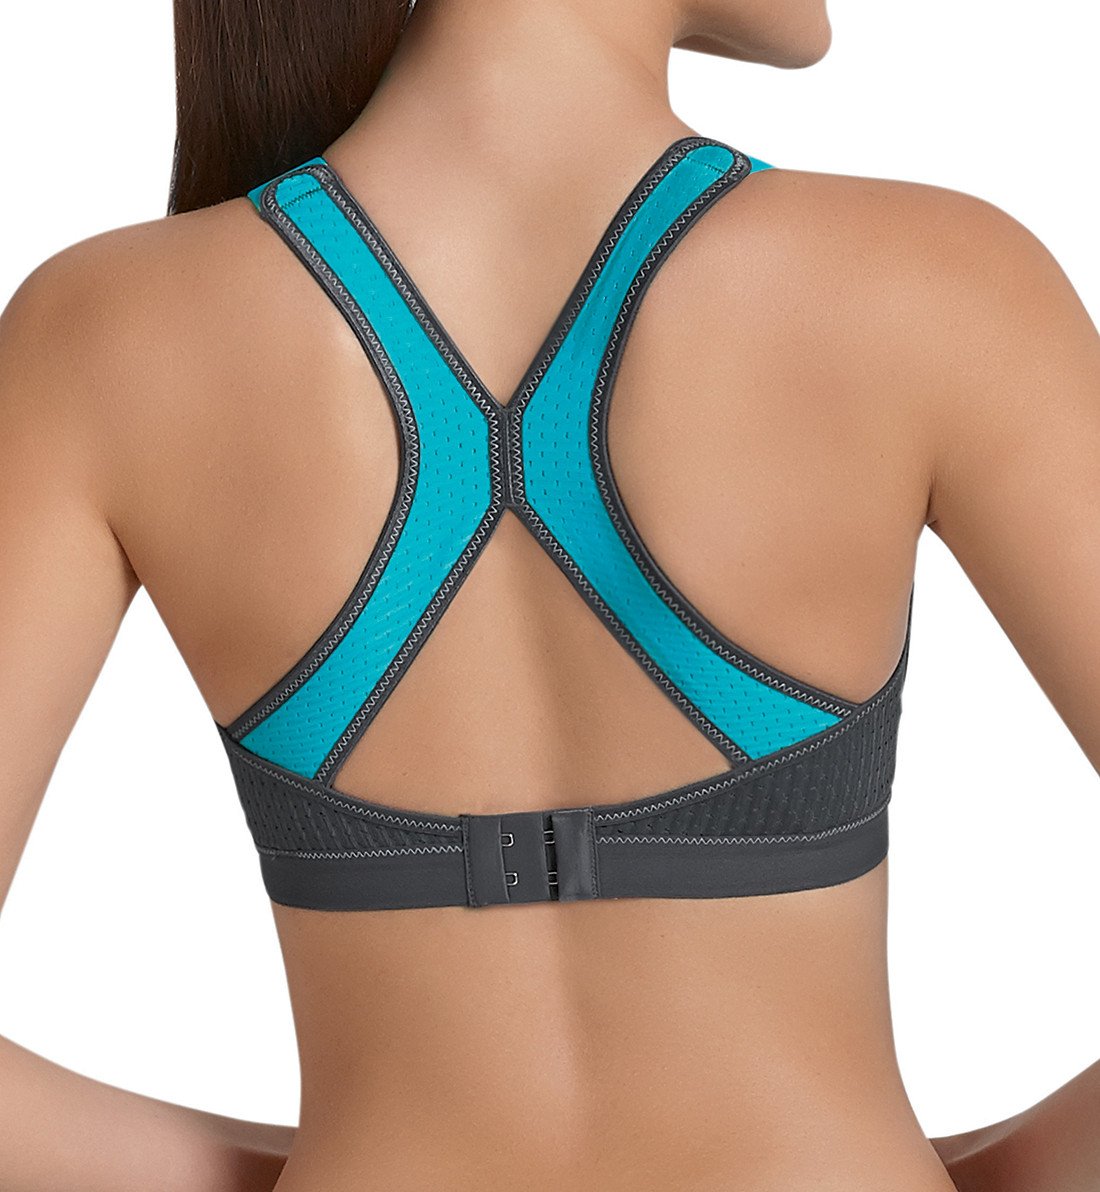 Anita Dynamix Star Max Support Softcup Sports Bra (5537),32B,Peacock/Anthracite - Peacock/Anthracite,32B